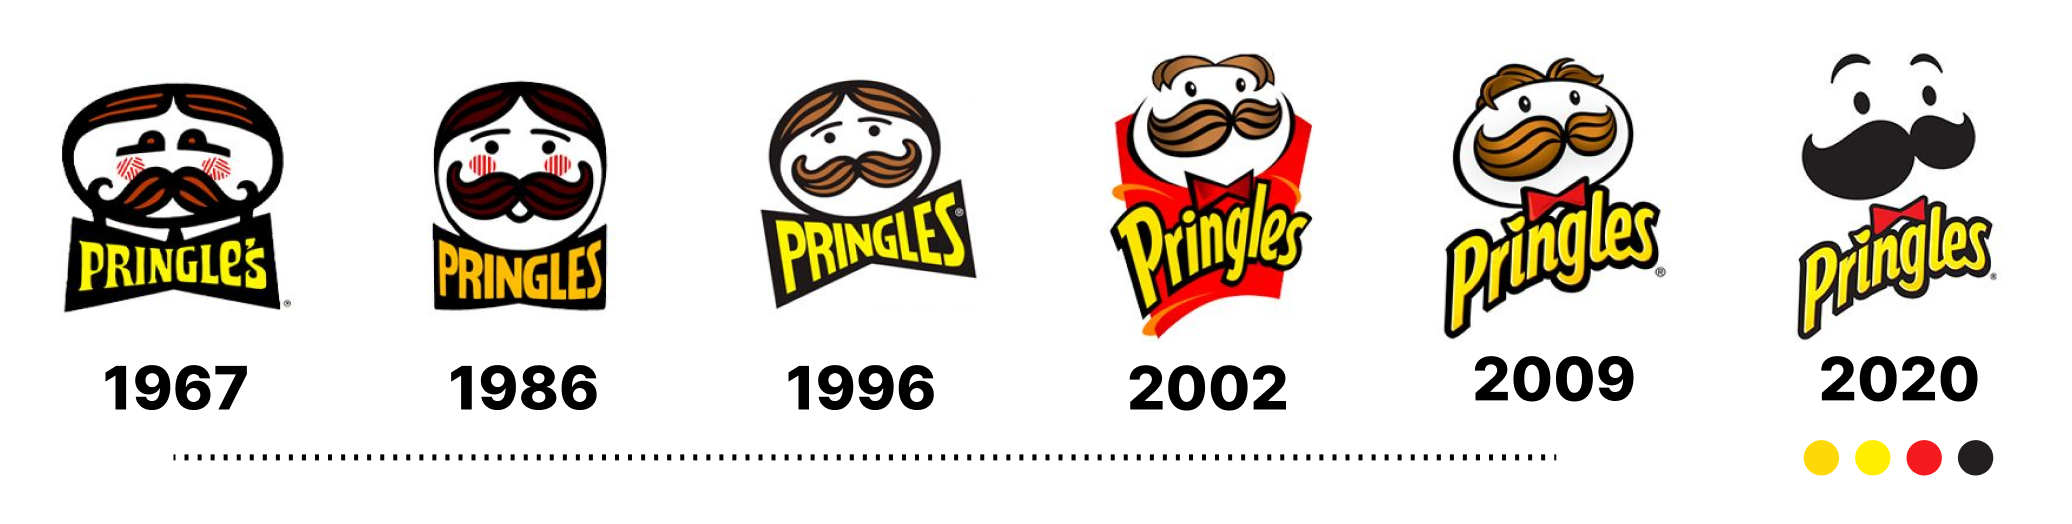 Pringles Logo Over The Years Imagesee